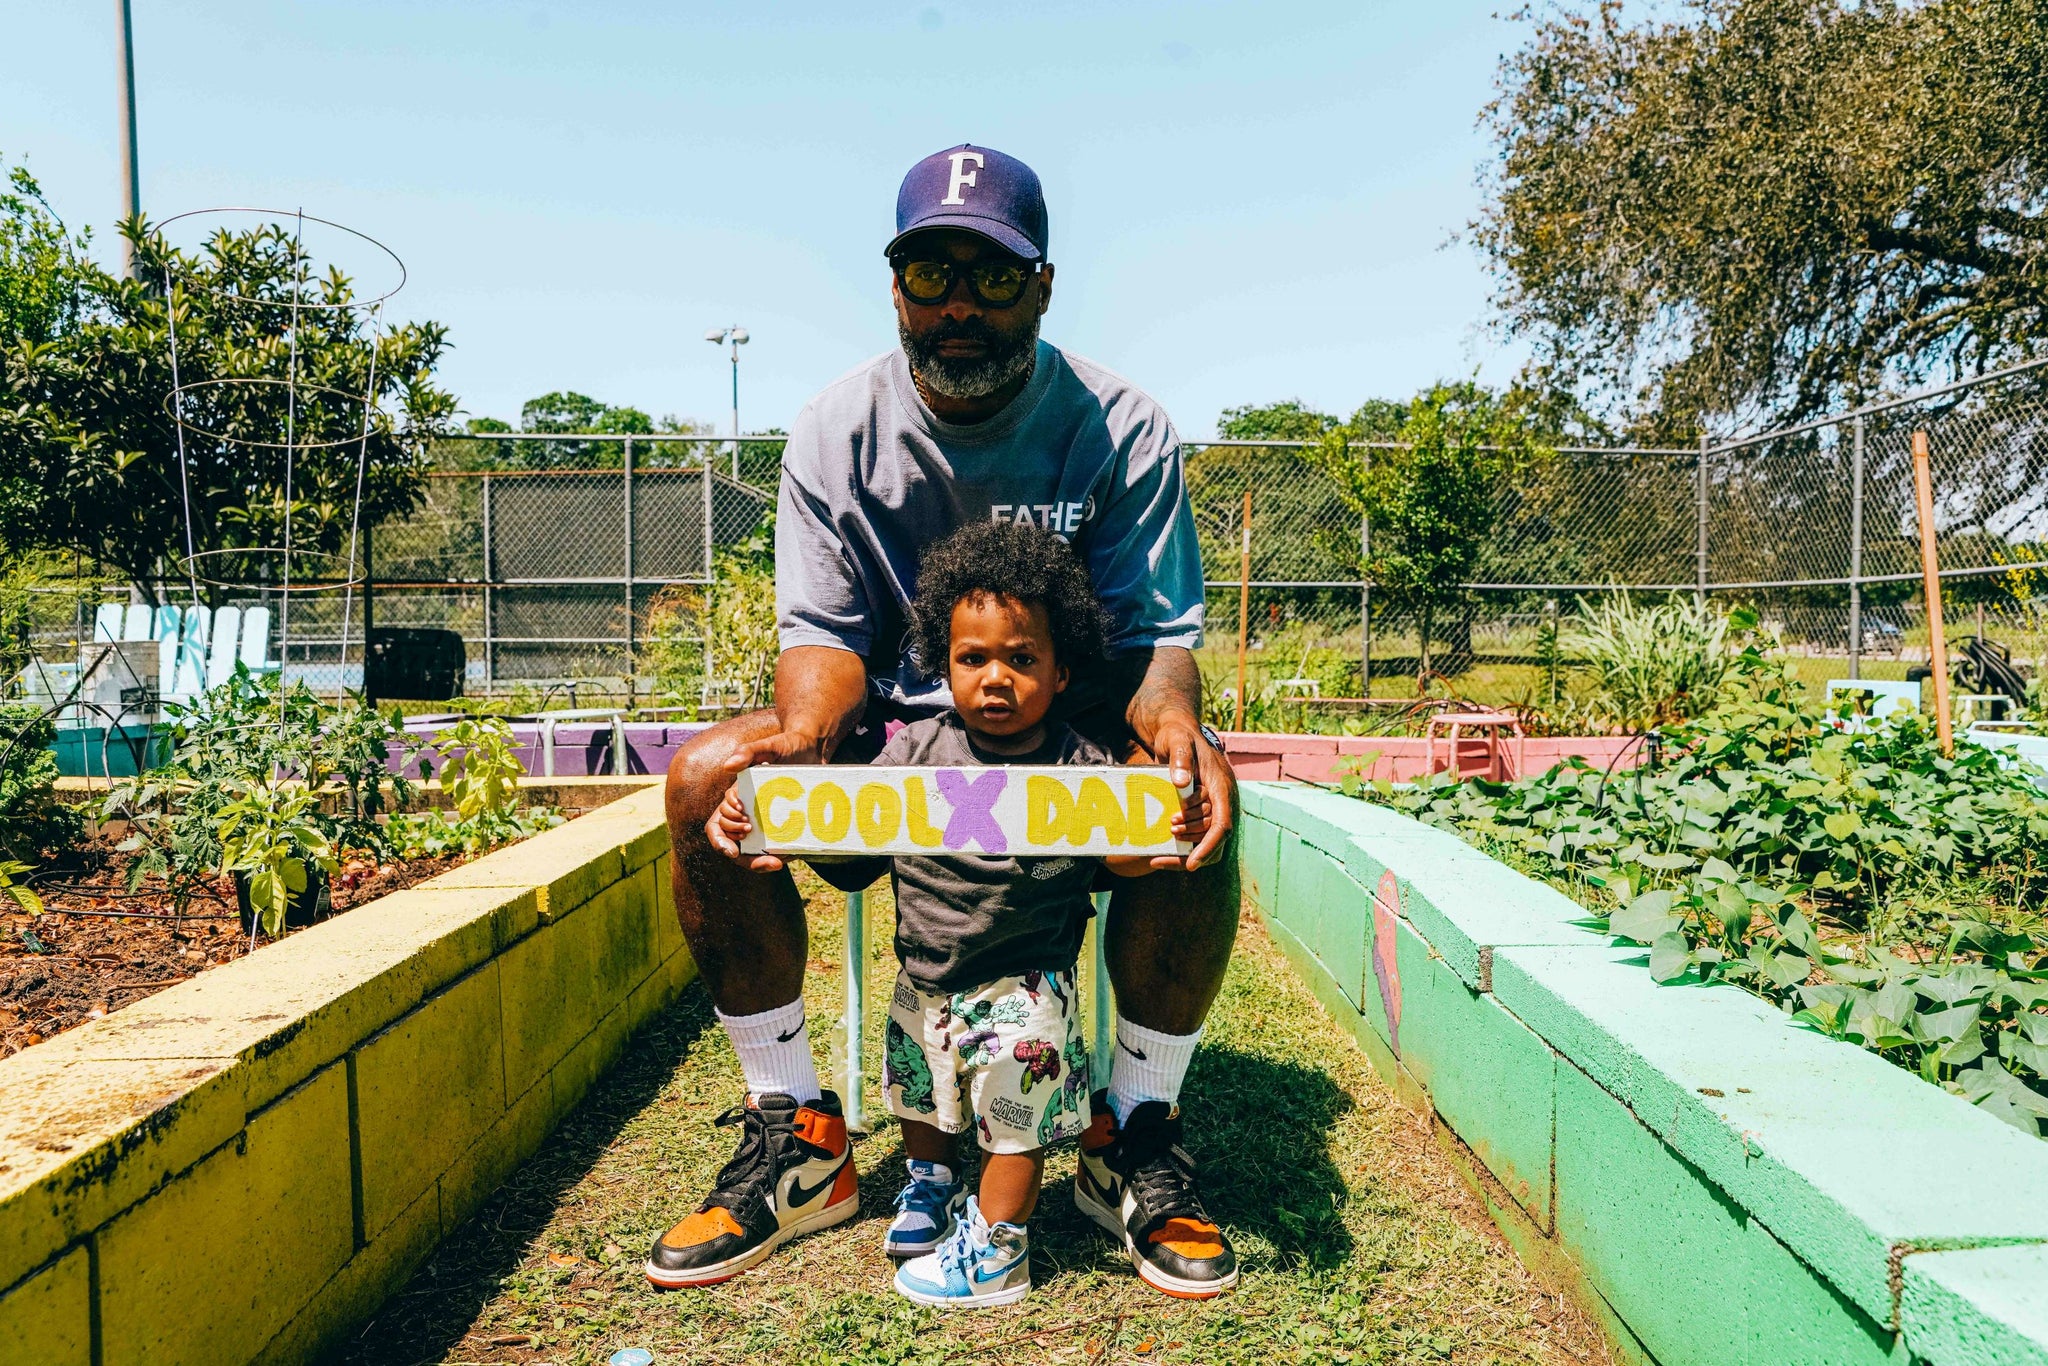 Kevin and his son Lenox standing between rows of garden beds. Lenox, who is a toddler with curly black hair, is holding a wooden sign that says CoolxDad. Kevin is crouching behind him holding the sign's edges. He's wearing a T-shirt and a baseball cap and looks serious. It's a sunny day.